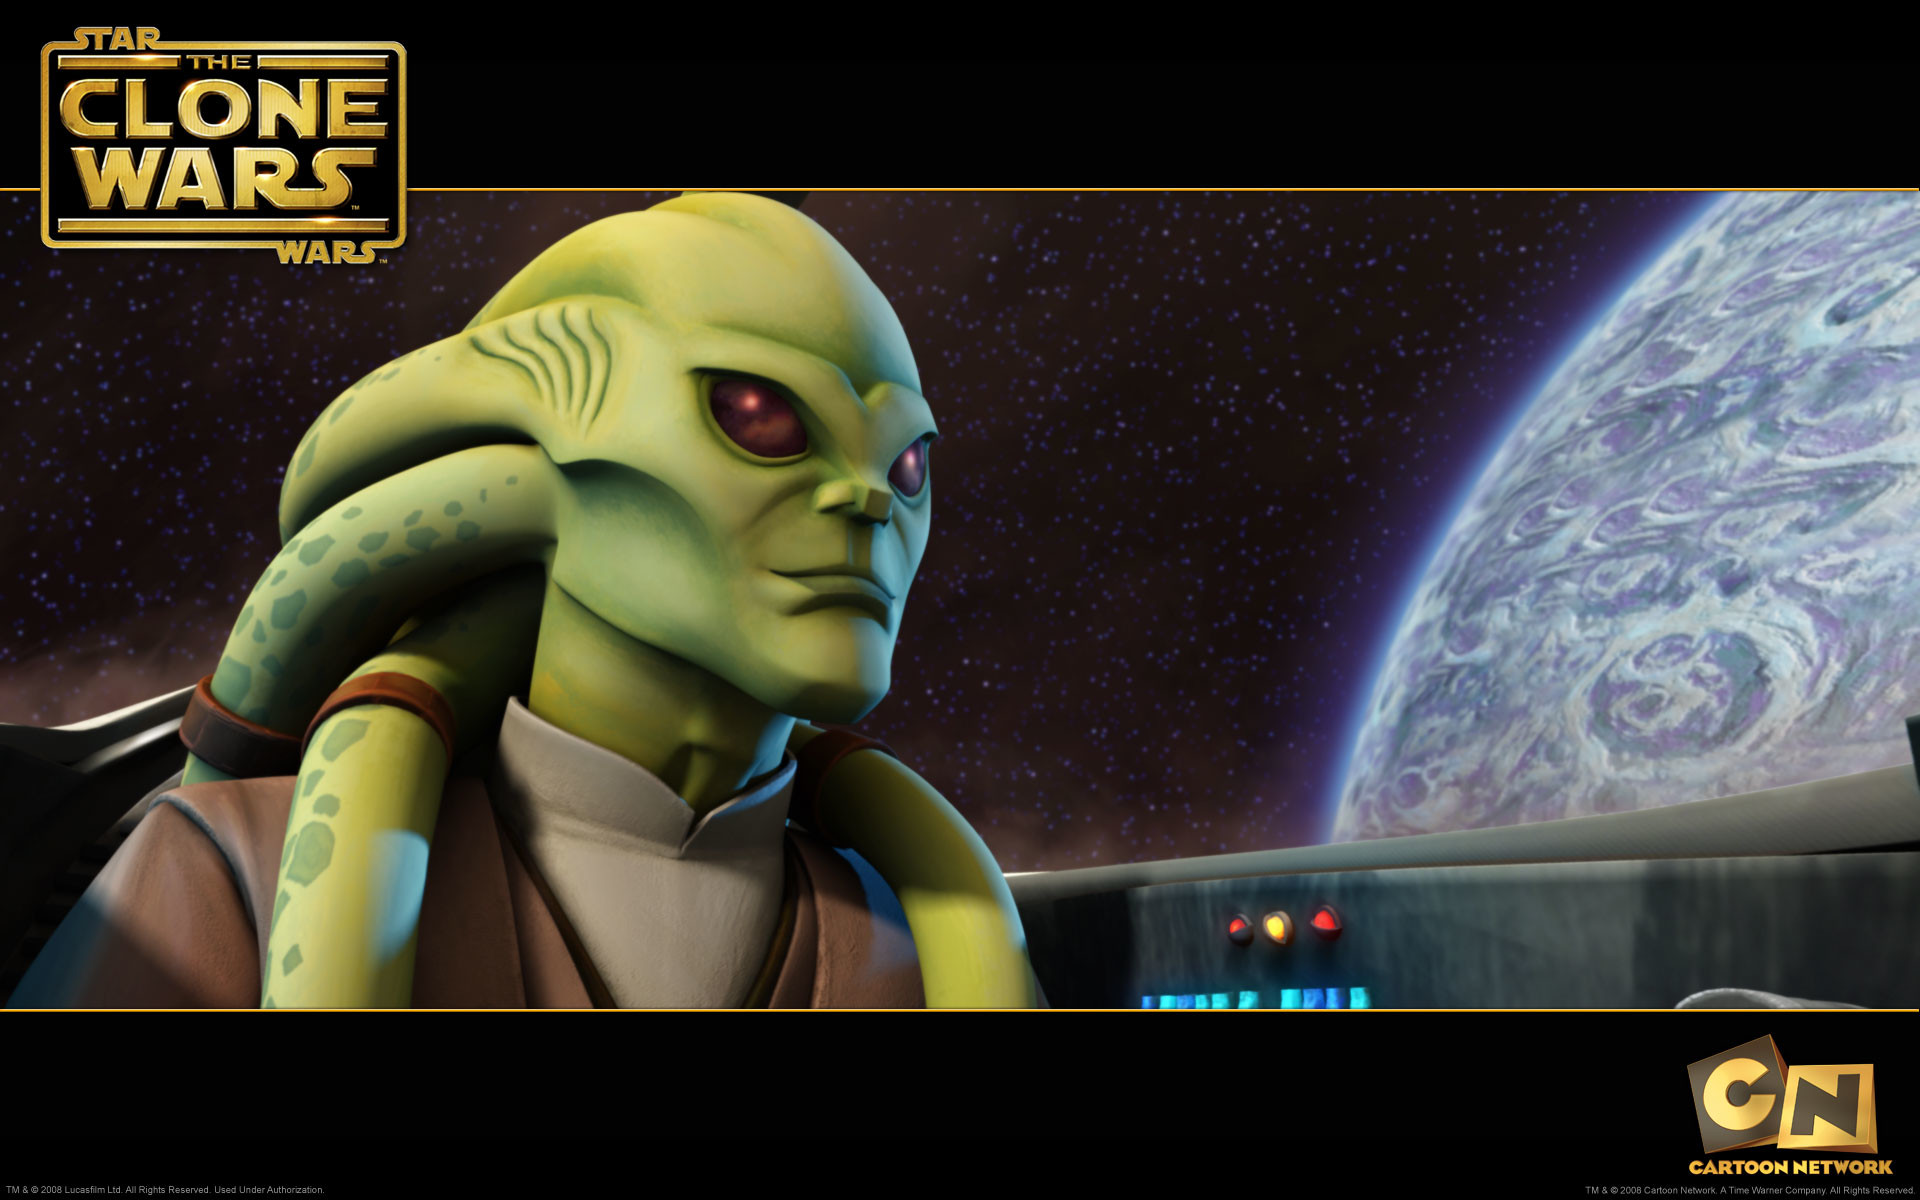 1920x1200 wallpaper image of jedi master kit fisto from the clone wars